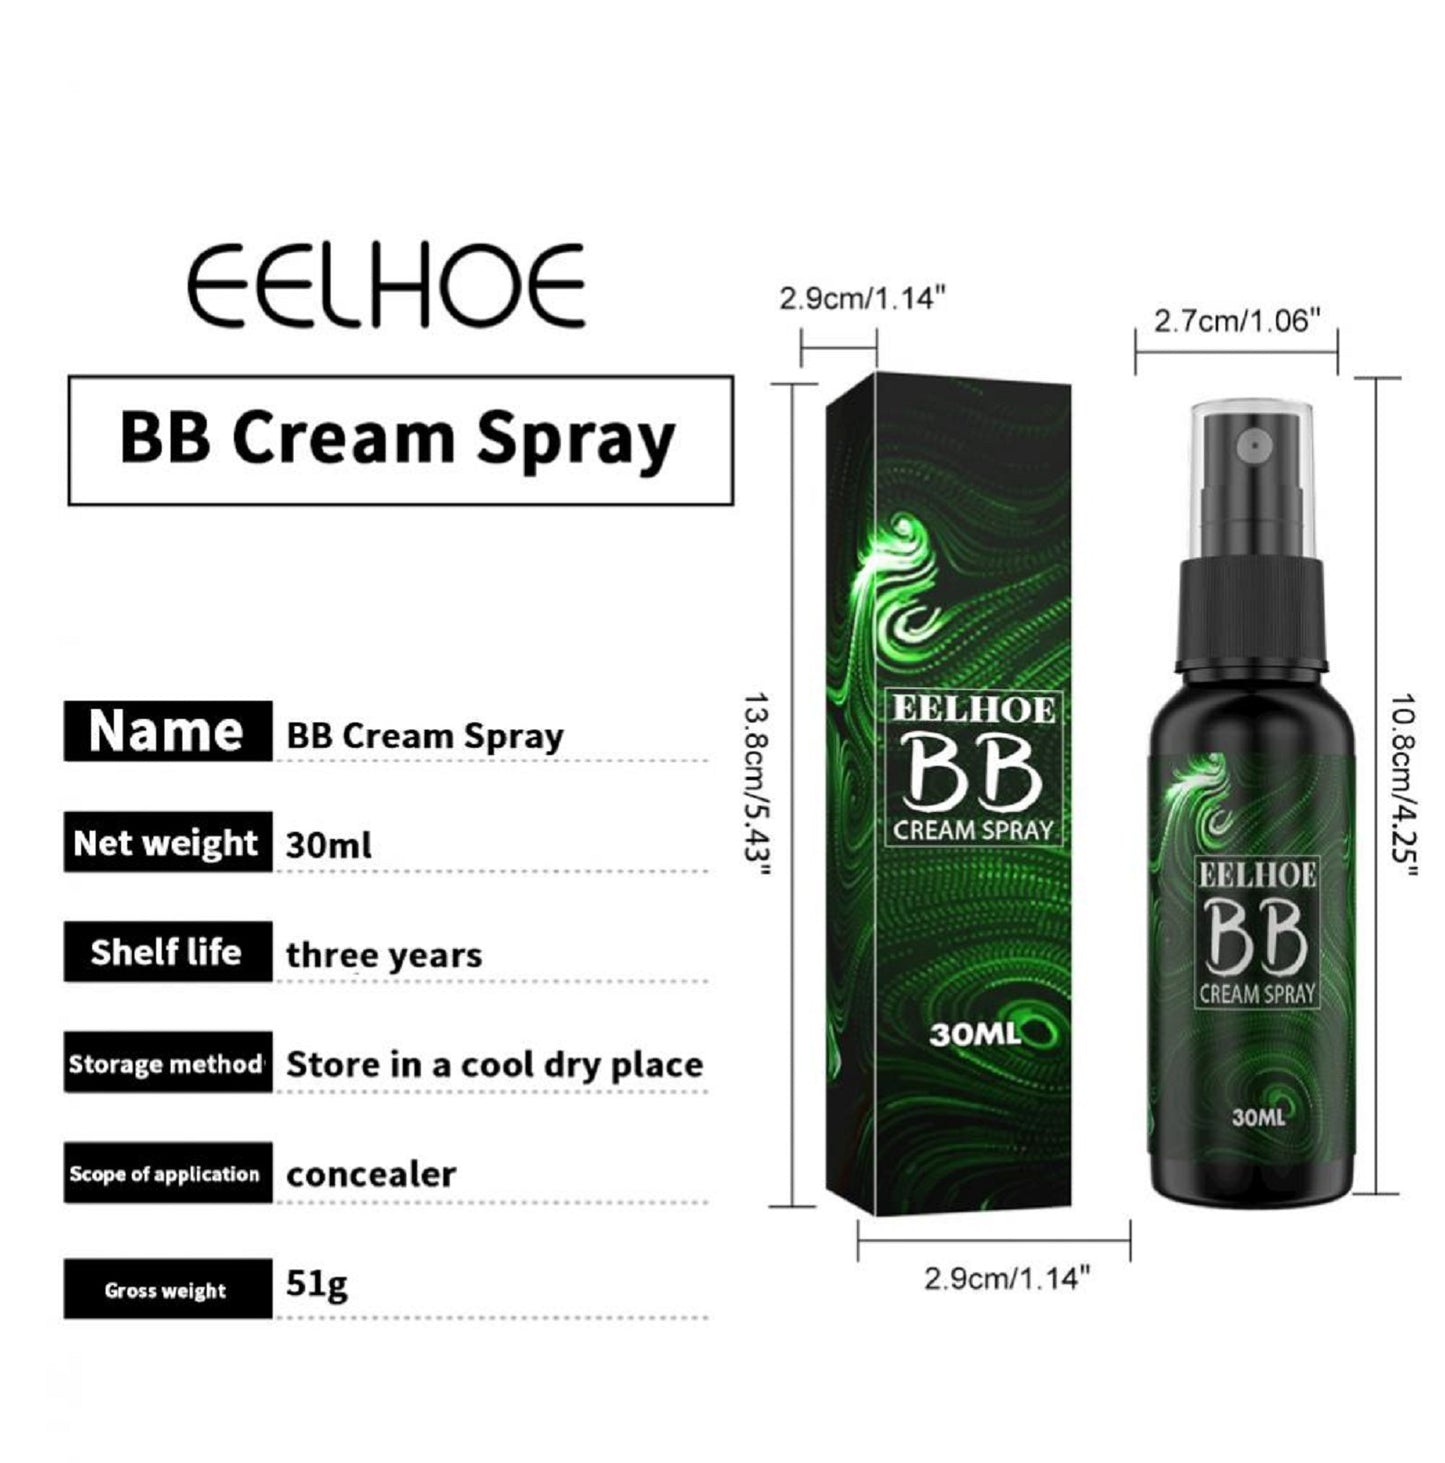 EELHOE 30ml BB Cream Spray for Facial Makeup Concealer Repair and Hydration